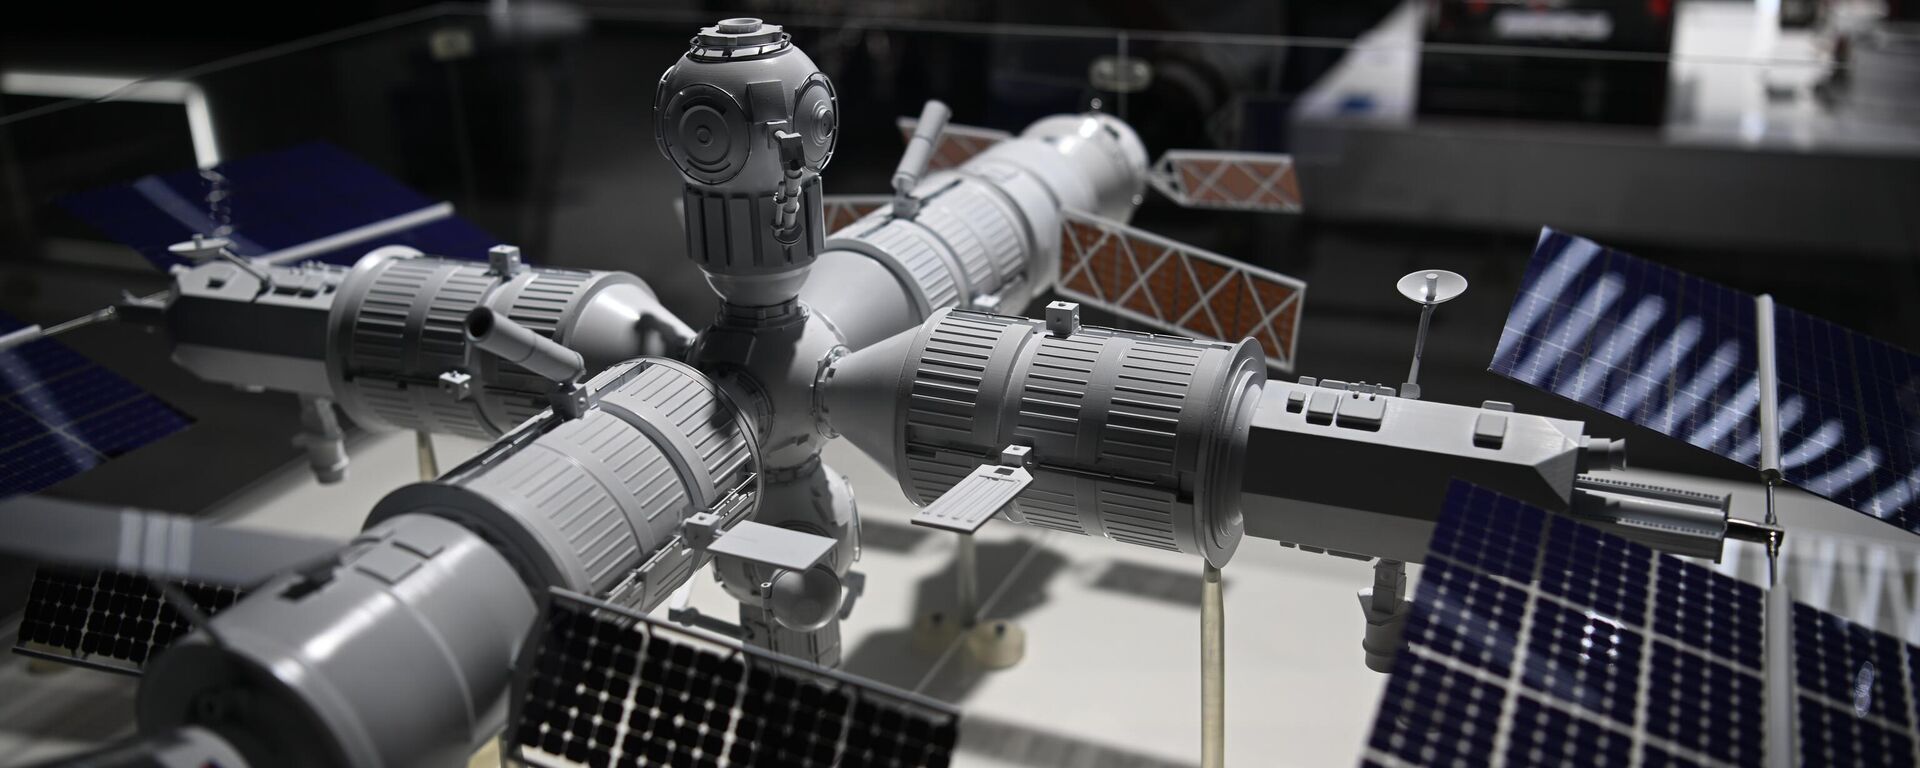 A model of a new Russian space station on display at the ARMY-2022 expo - Sputnik International, 1920, 16.08.2022